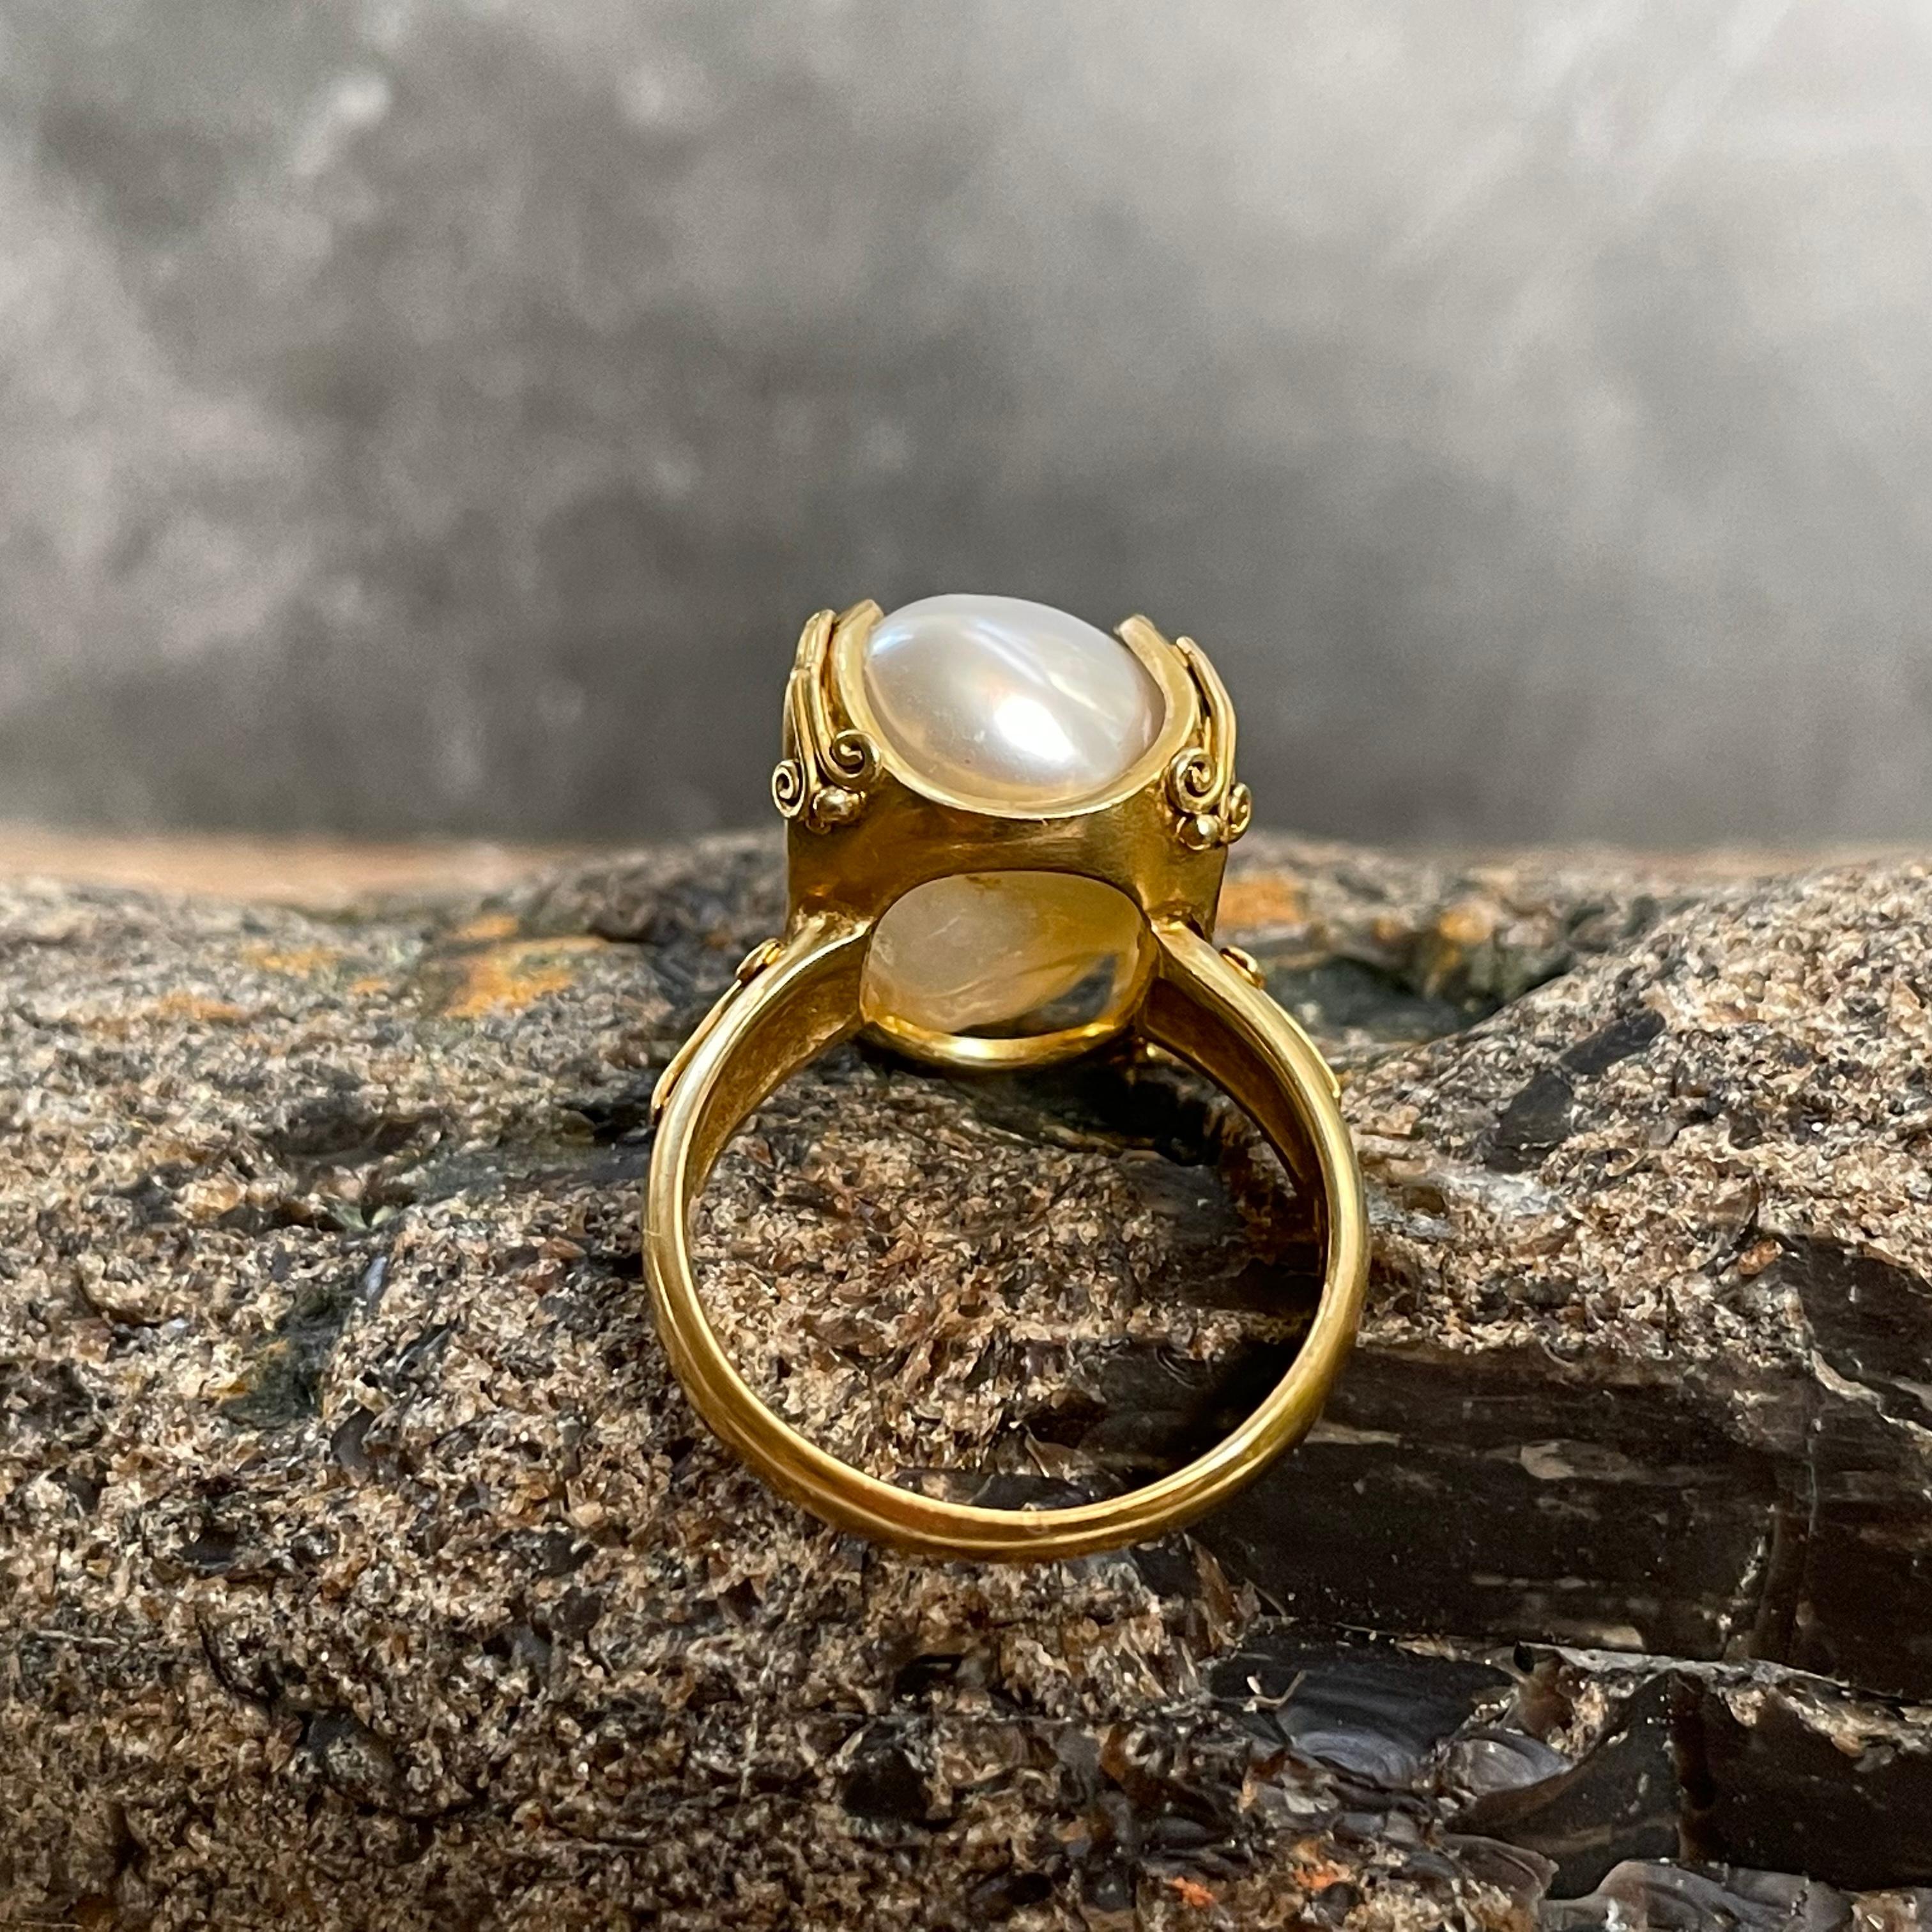 A lustrous, irregular, 9 x 15 mm white keshi pearl is held in four spiral wire ornamented prongs with a similar motif on the shank.  A great way to display this fantastic pearl.  All set within matte-finish gold. This ring is currently sized 6.  It